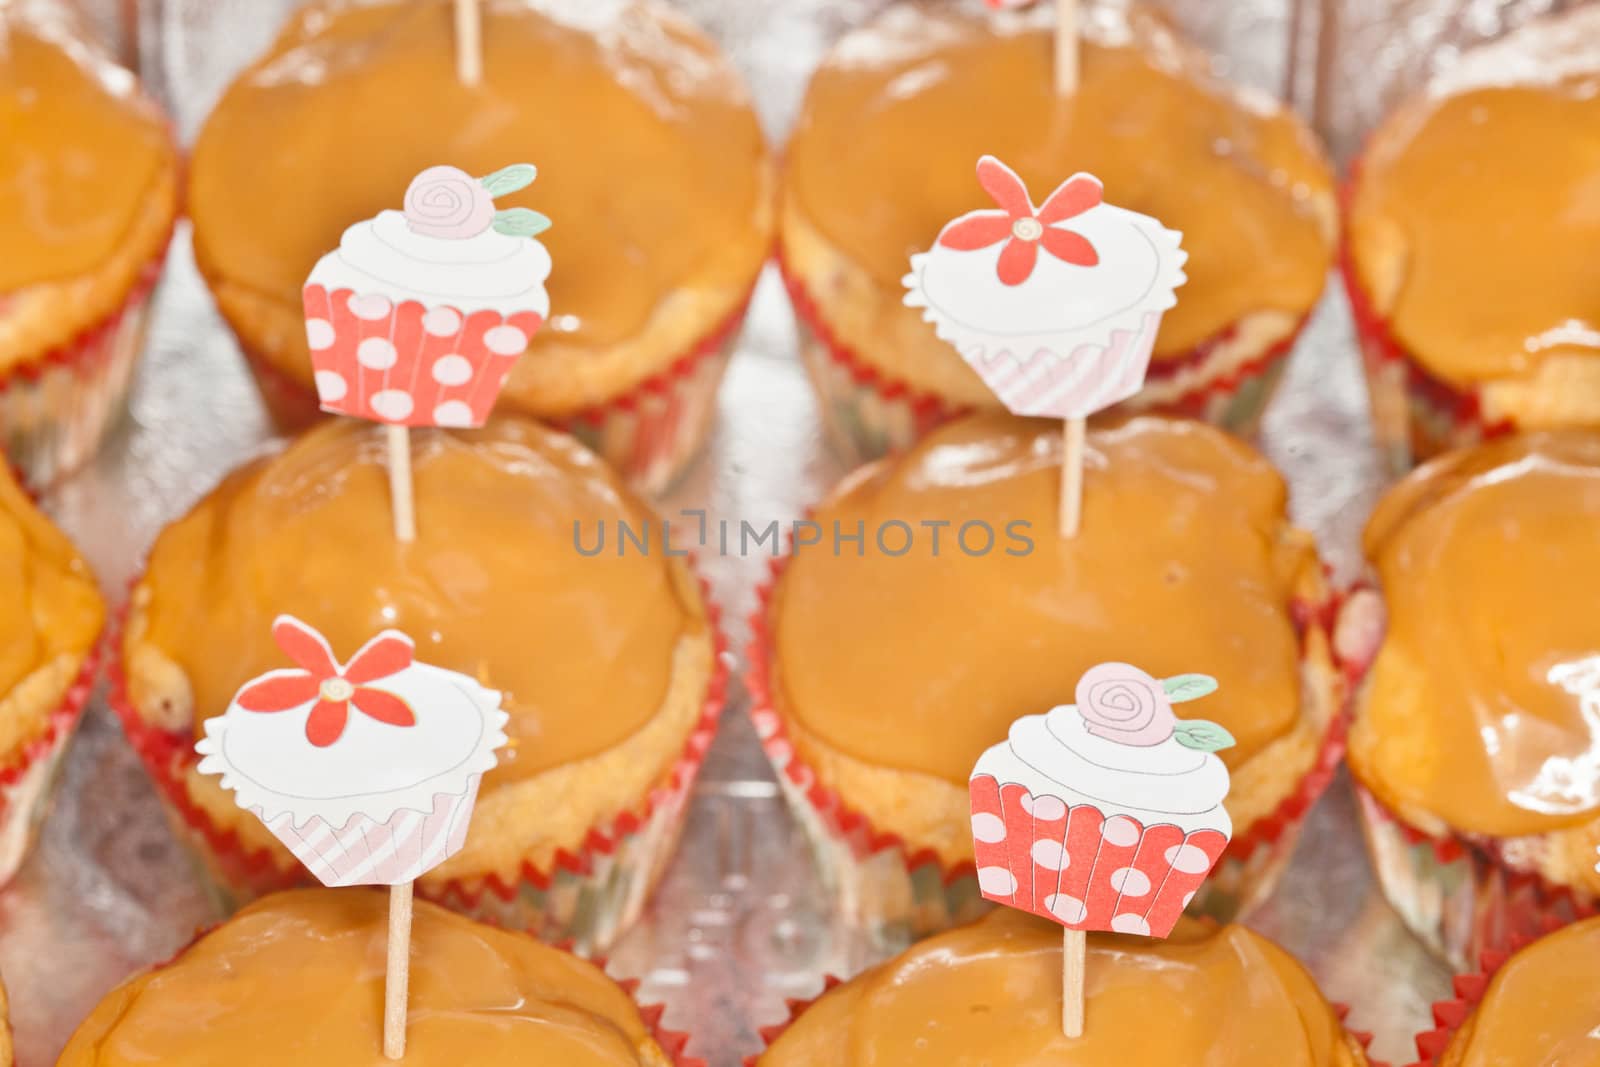 Tray of freshly baked homemade strawberry cupcakes with caramel topping